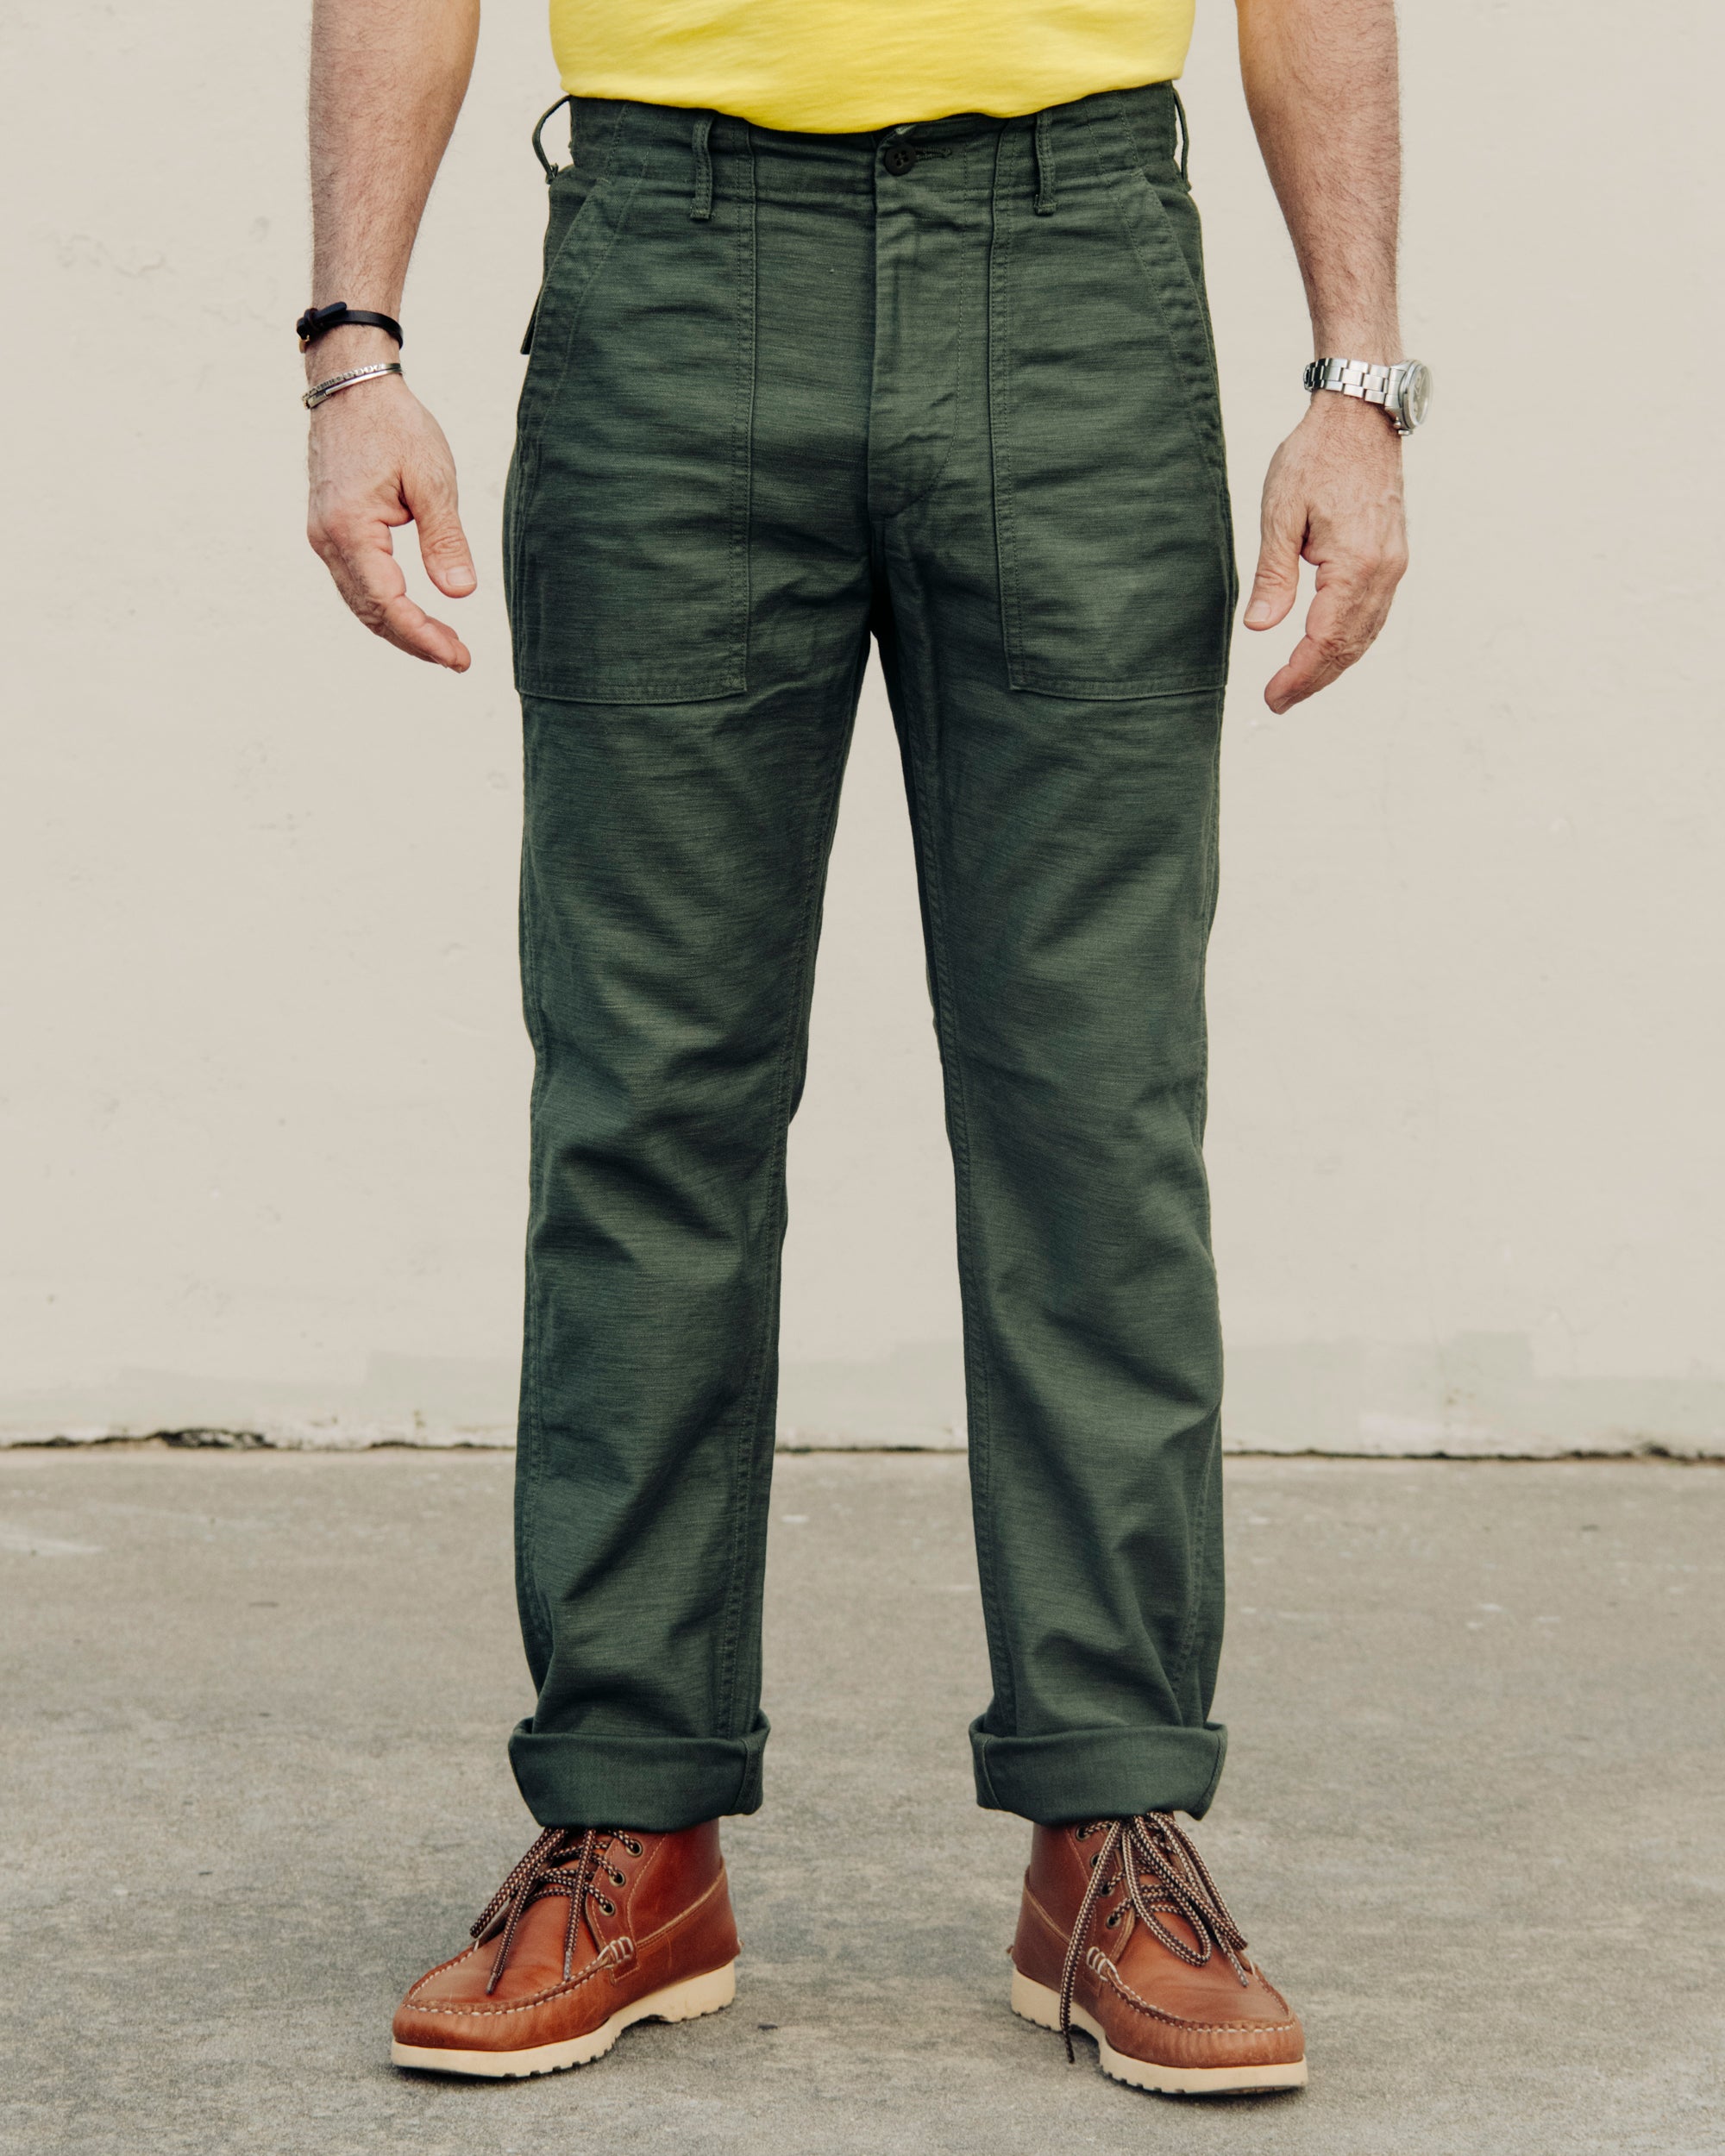 Orslow Fatigue Pant in Slim Cut – 22 Pcs by Man of the World